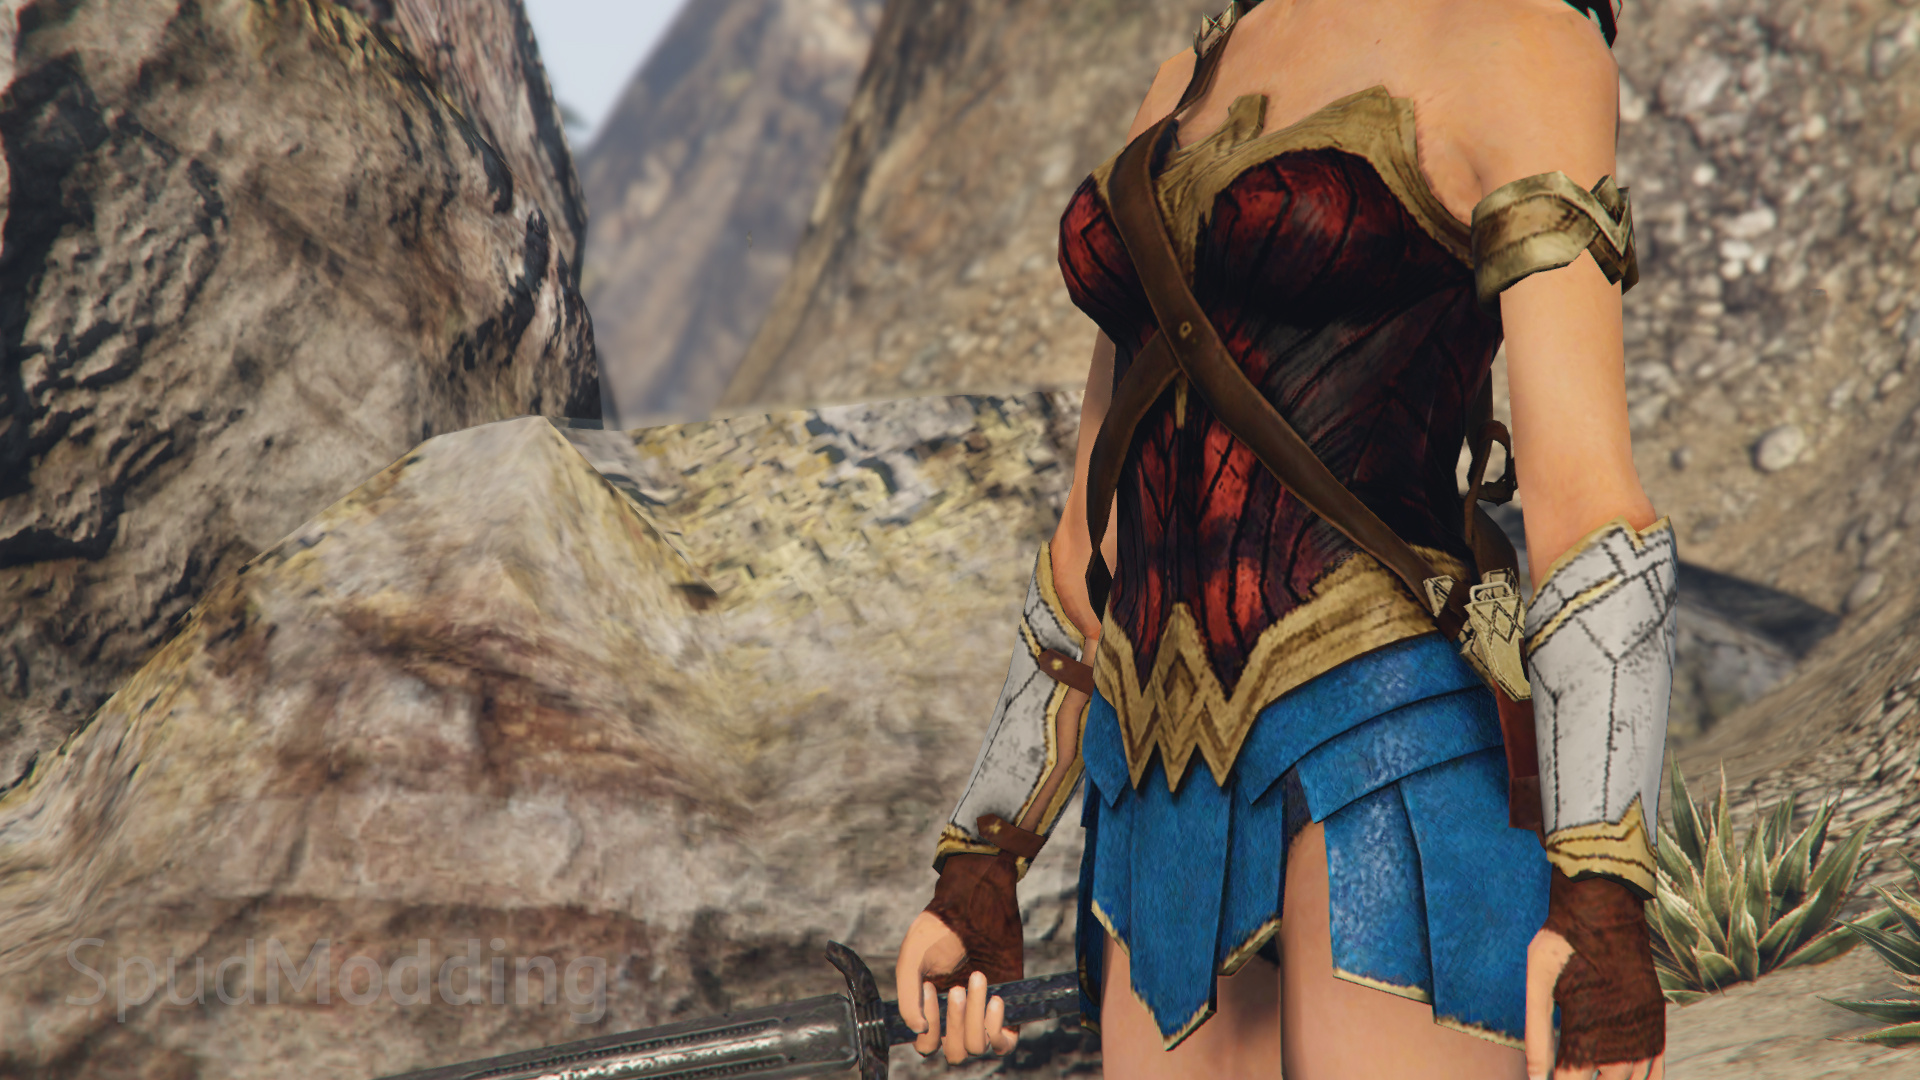 Wonder Woman instal the last version for android